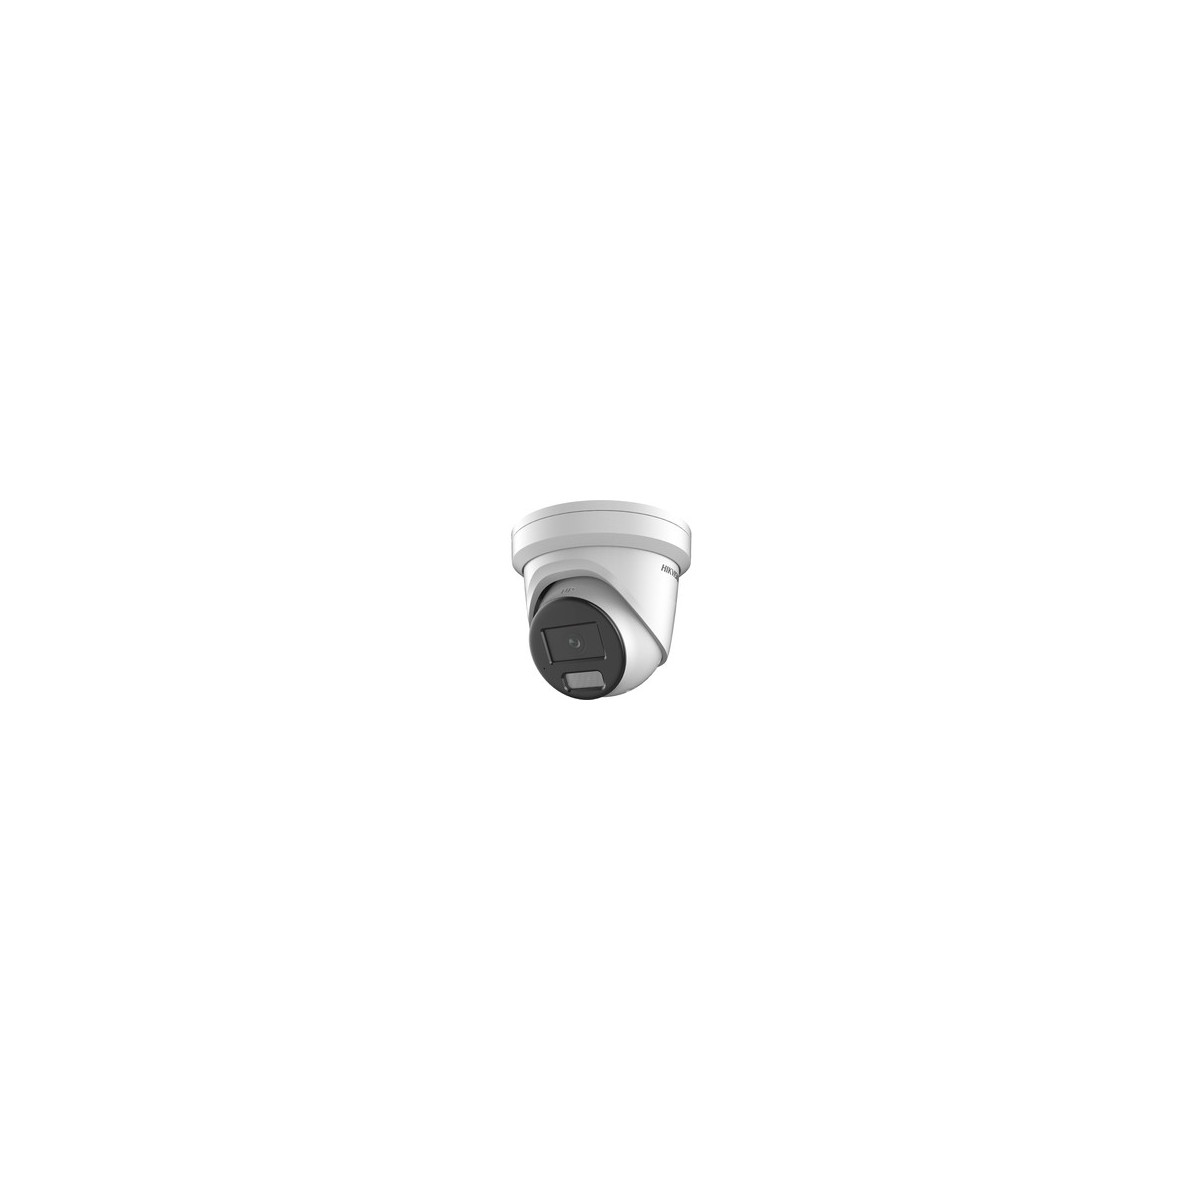 Hikvision Digital Technology DS-2CD2327G2-L(2.8mm)(C) - IP security camera - Indoor  outdoor - Wired - Multi - FCC SDoC (47 CFR 